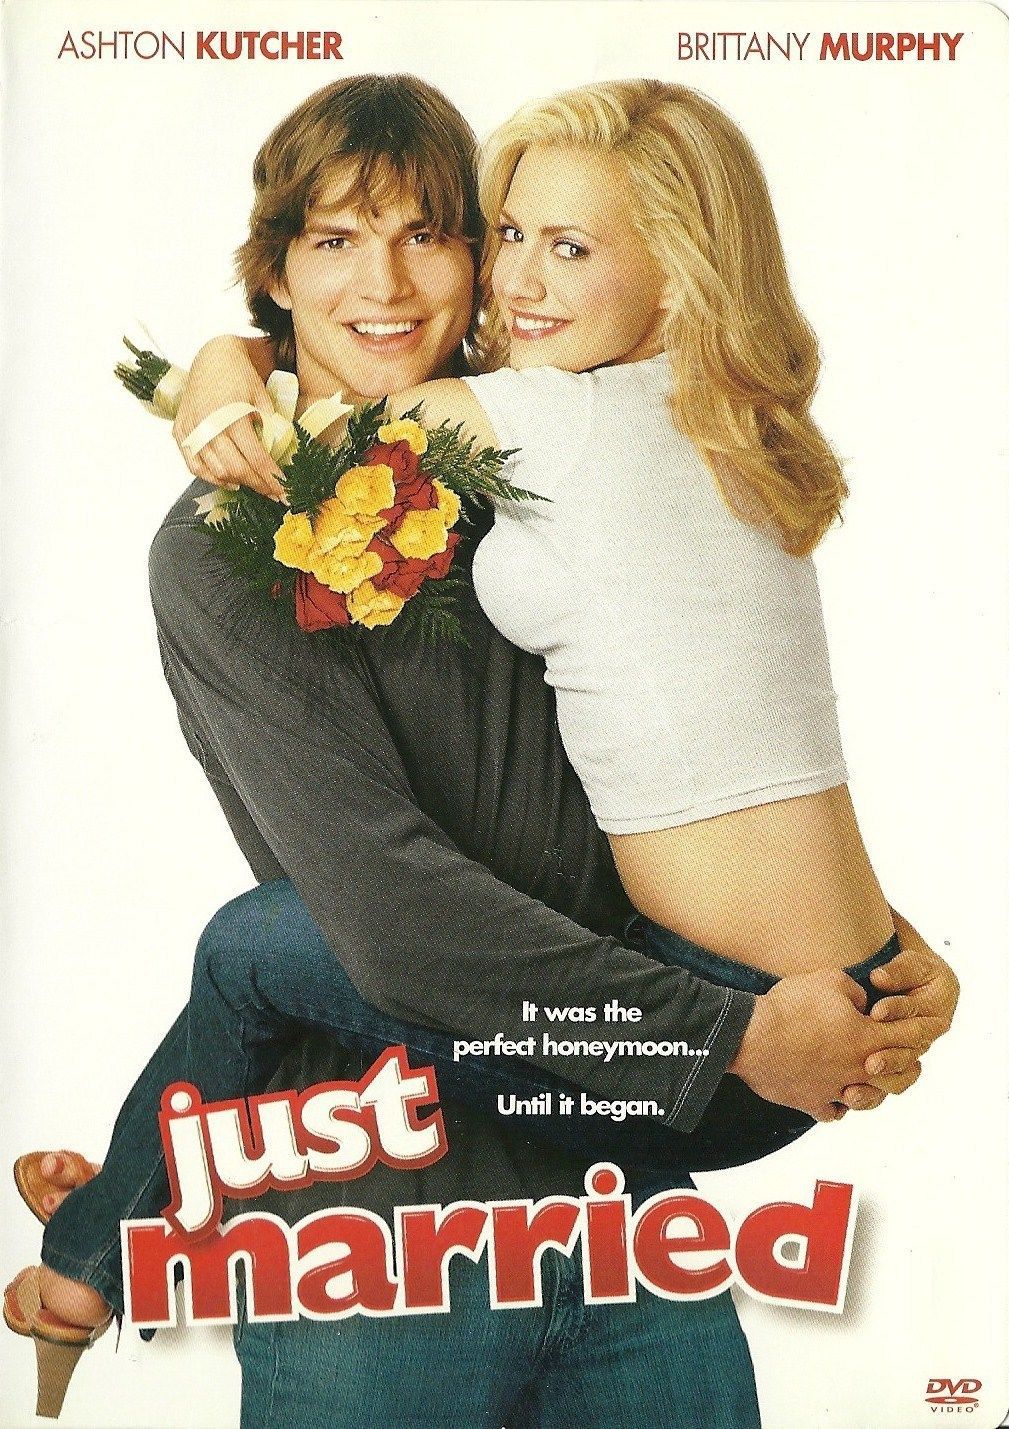 Just Married Dvd Ashton Kutcher Brittany Murphy Full Screen And Widescreen Dvd Hd Dvd And Blu Ray